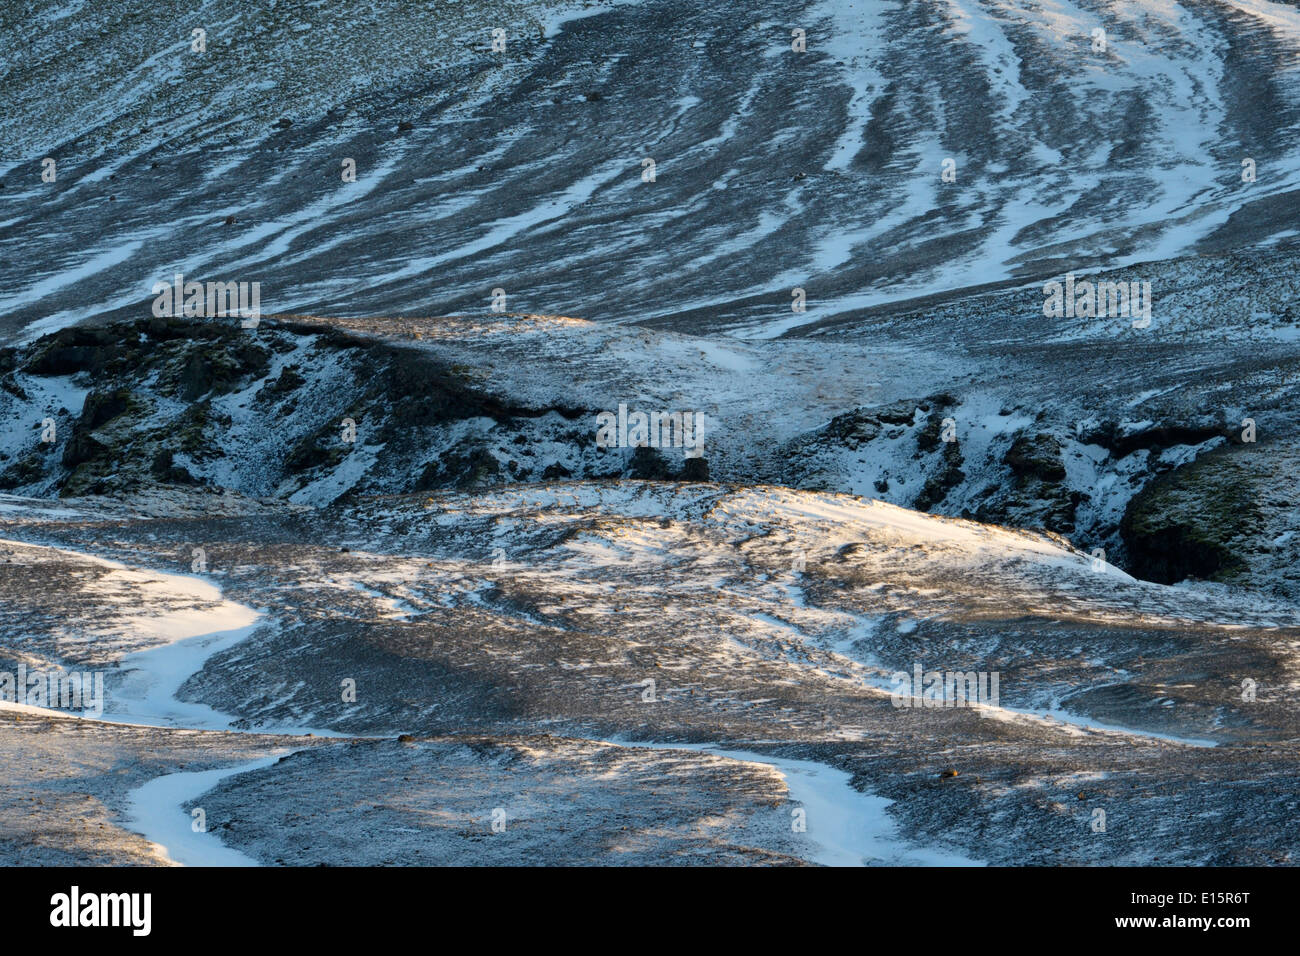 Volcanic landscape from the Hekla volcano at Iceland. Stock Photo